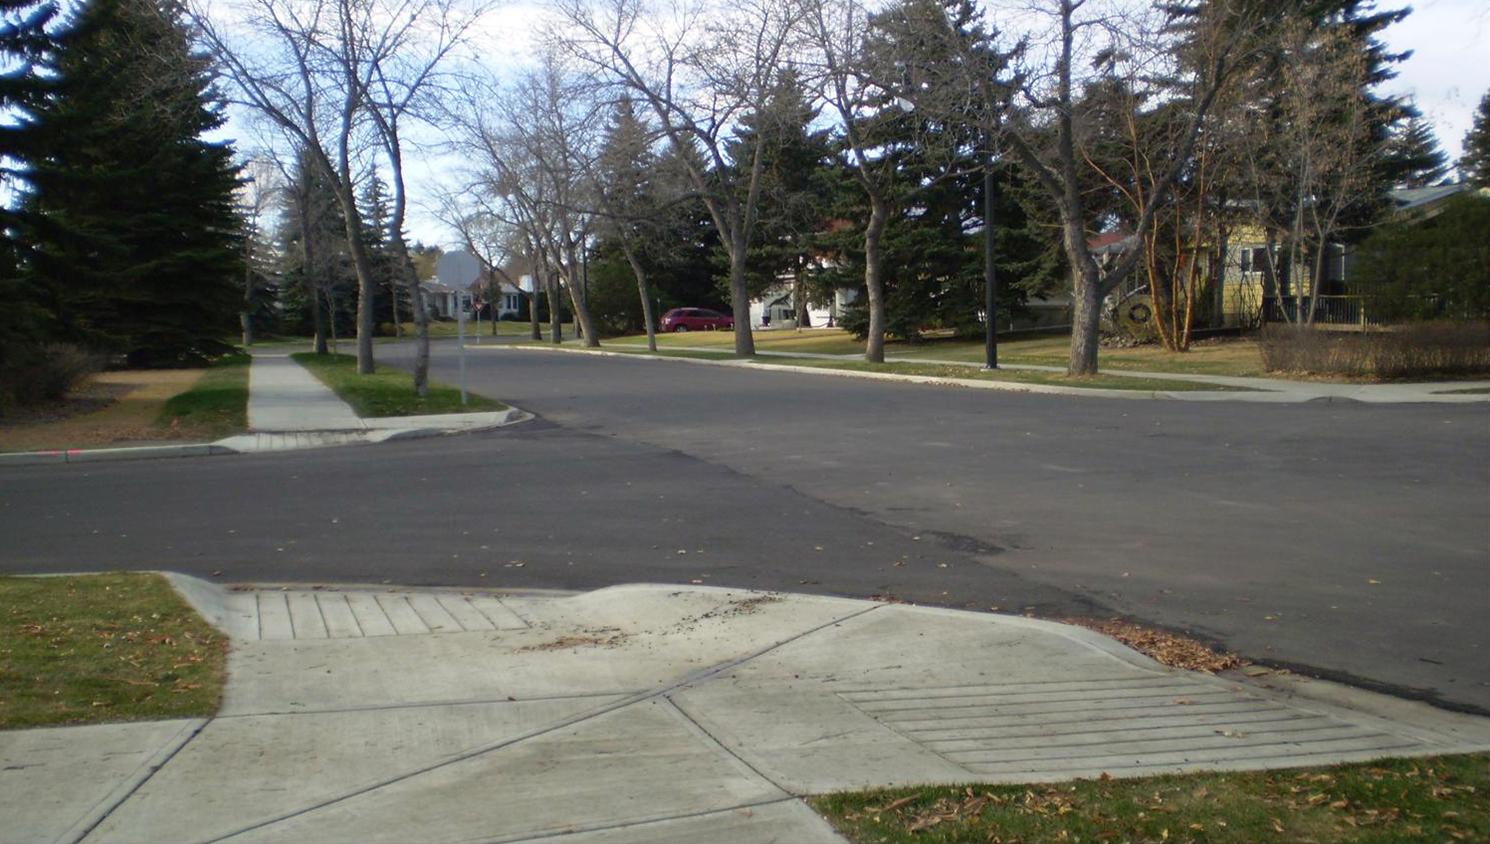 A curb ramp on the corner of the road